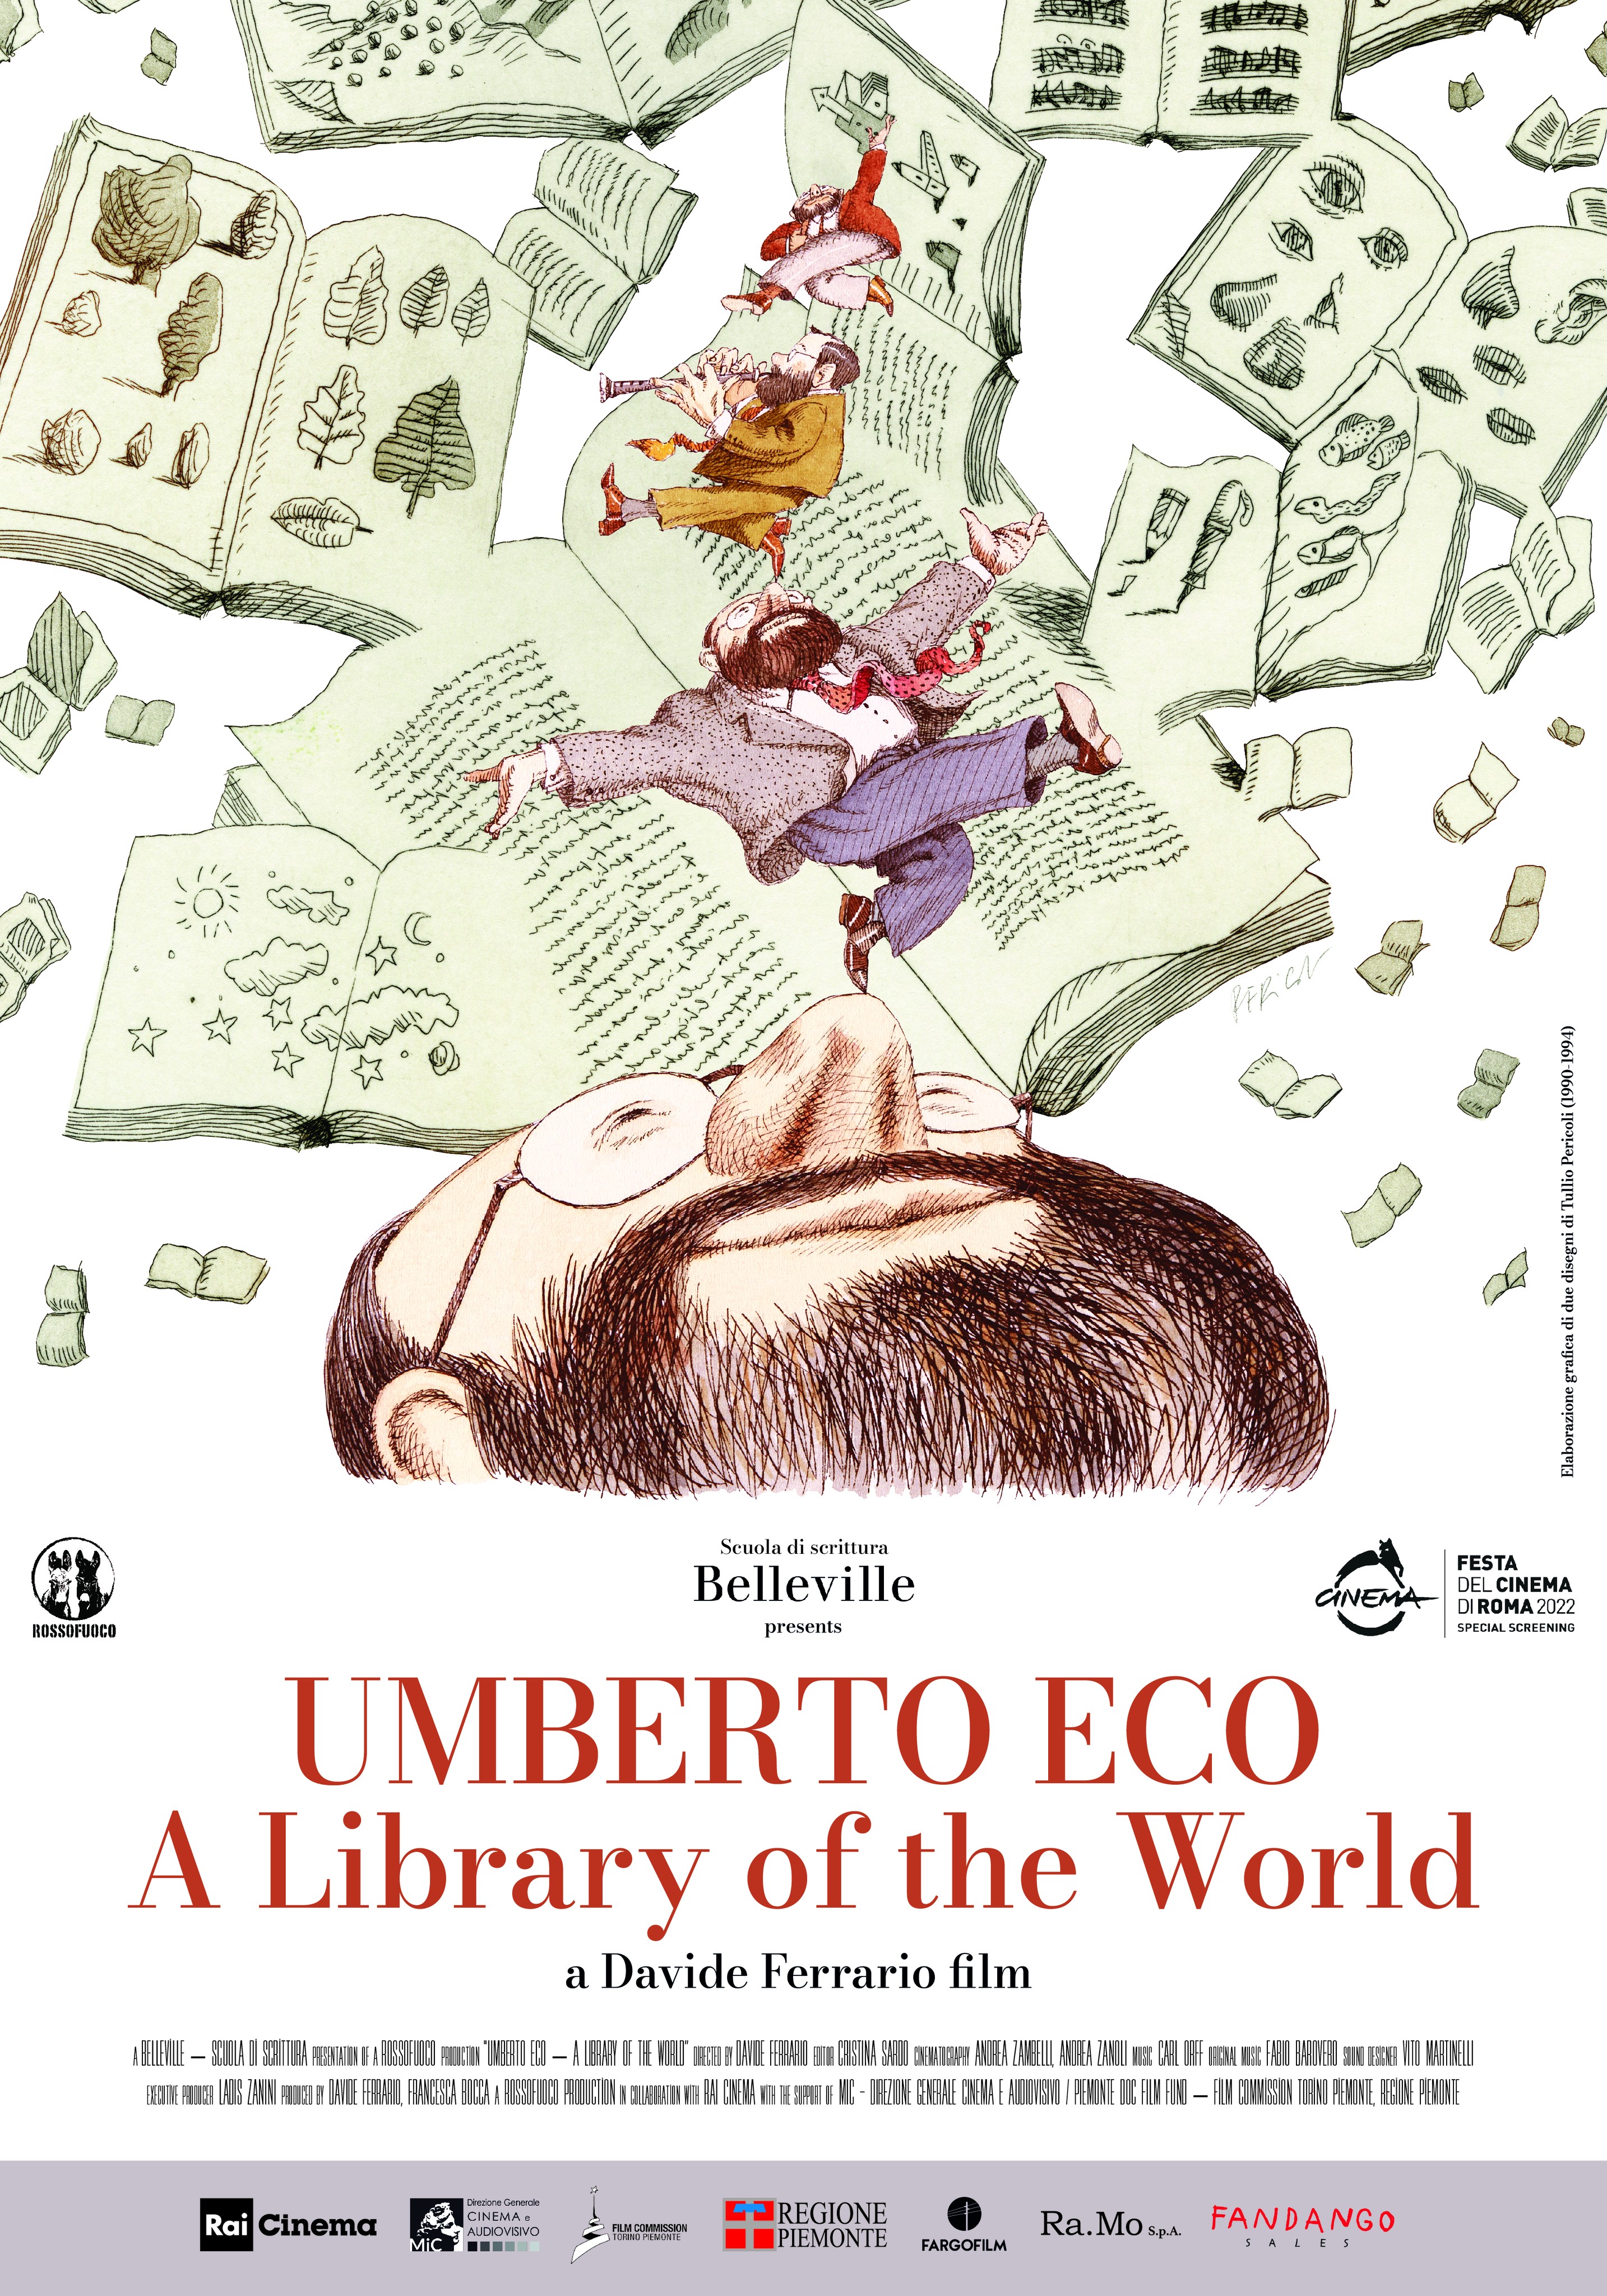 Umberto Eco: A Library of the World' pages through memory